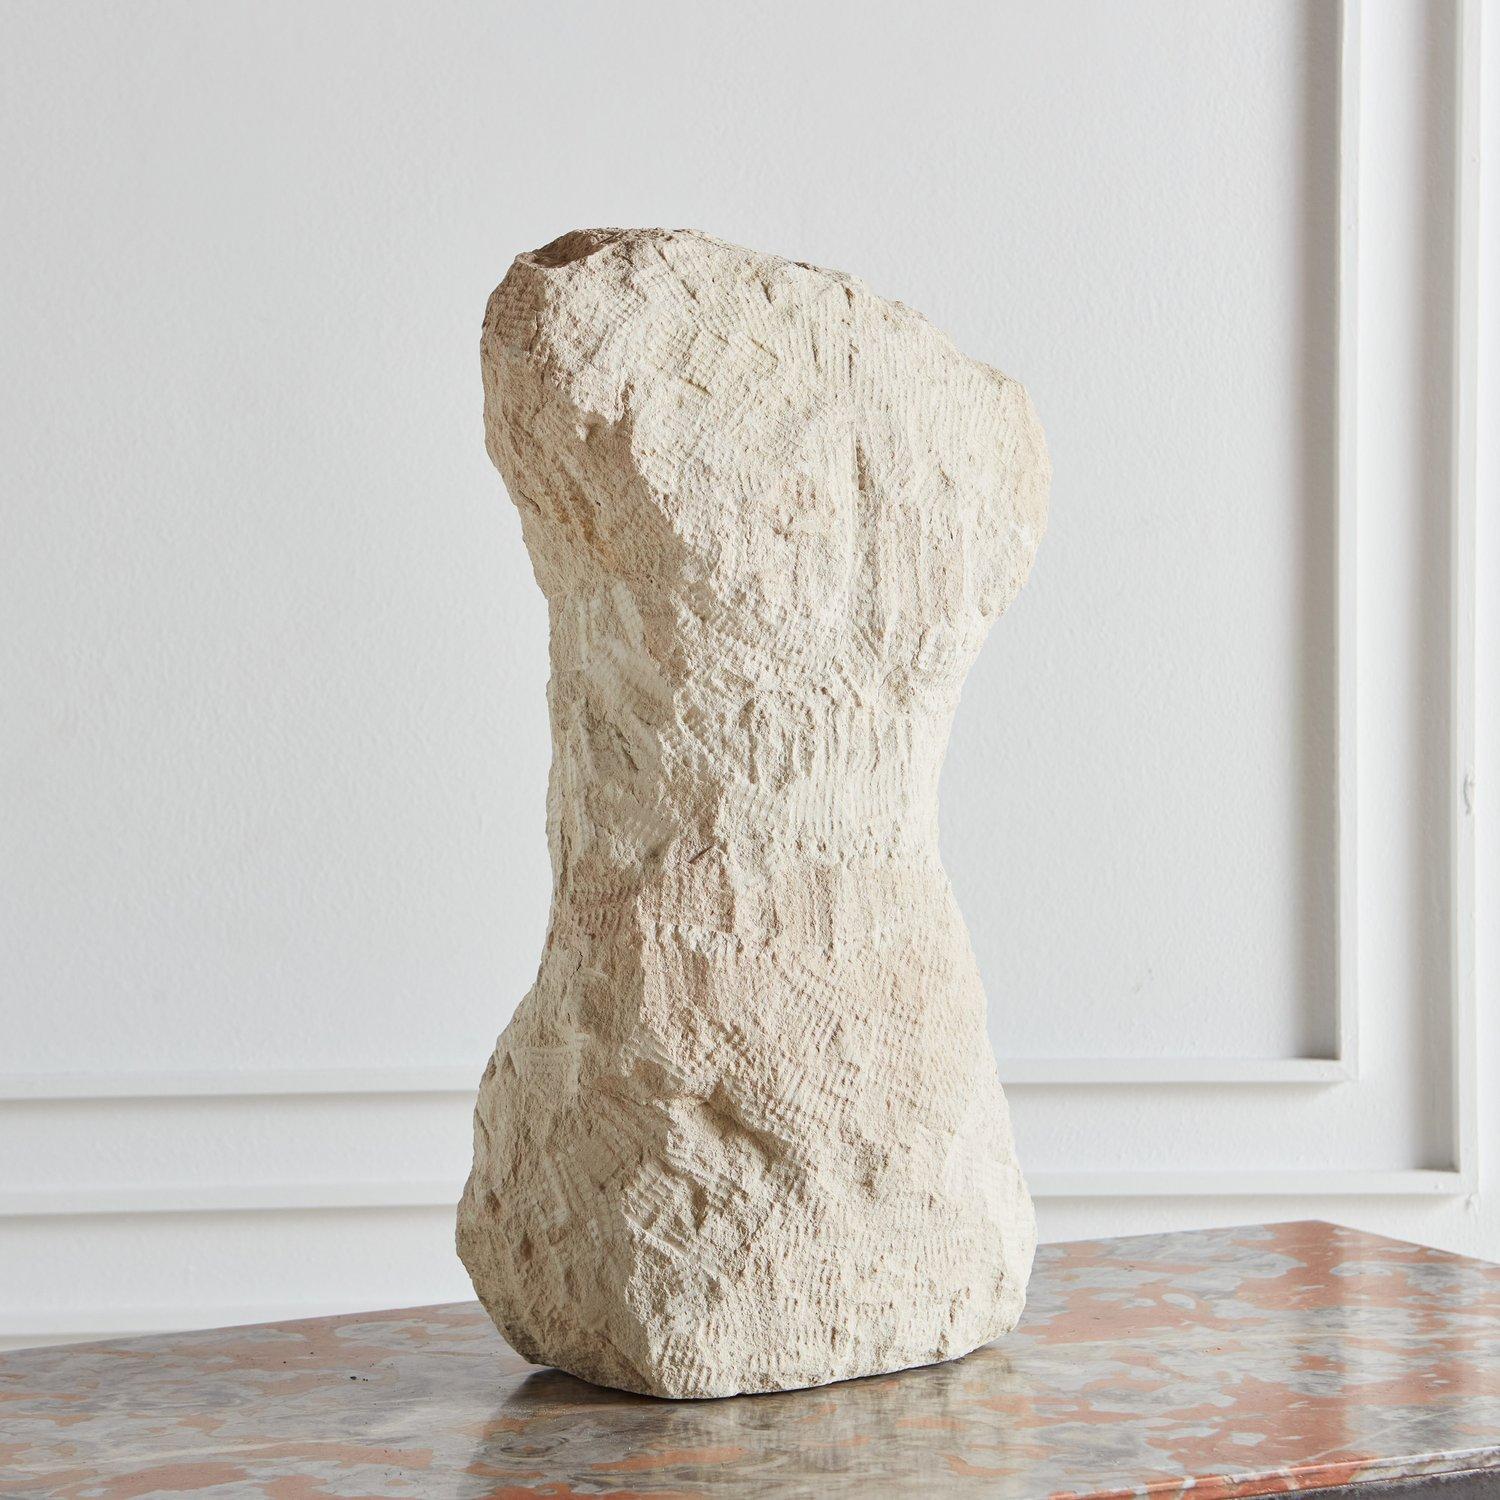 A vintage figural limestone sculpture with porous textural details. A beautiful, organic piece perfect for styling. Unsigned. Sourced in France, 1980s.